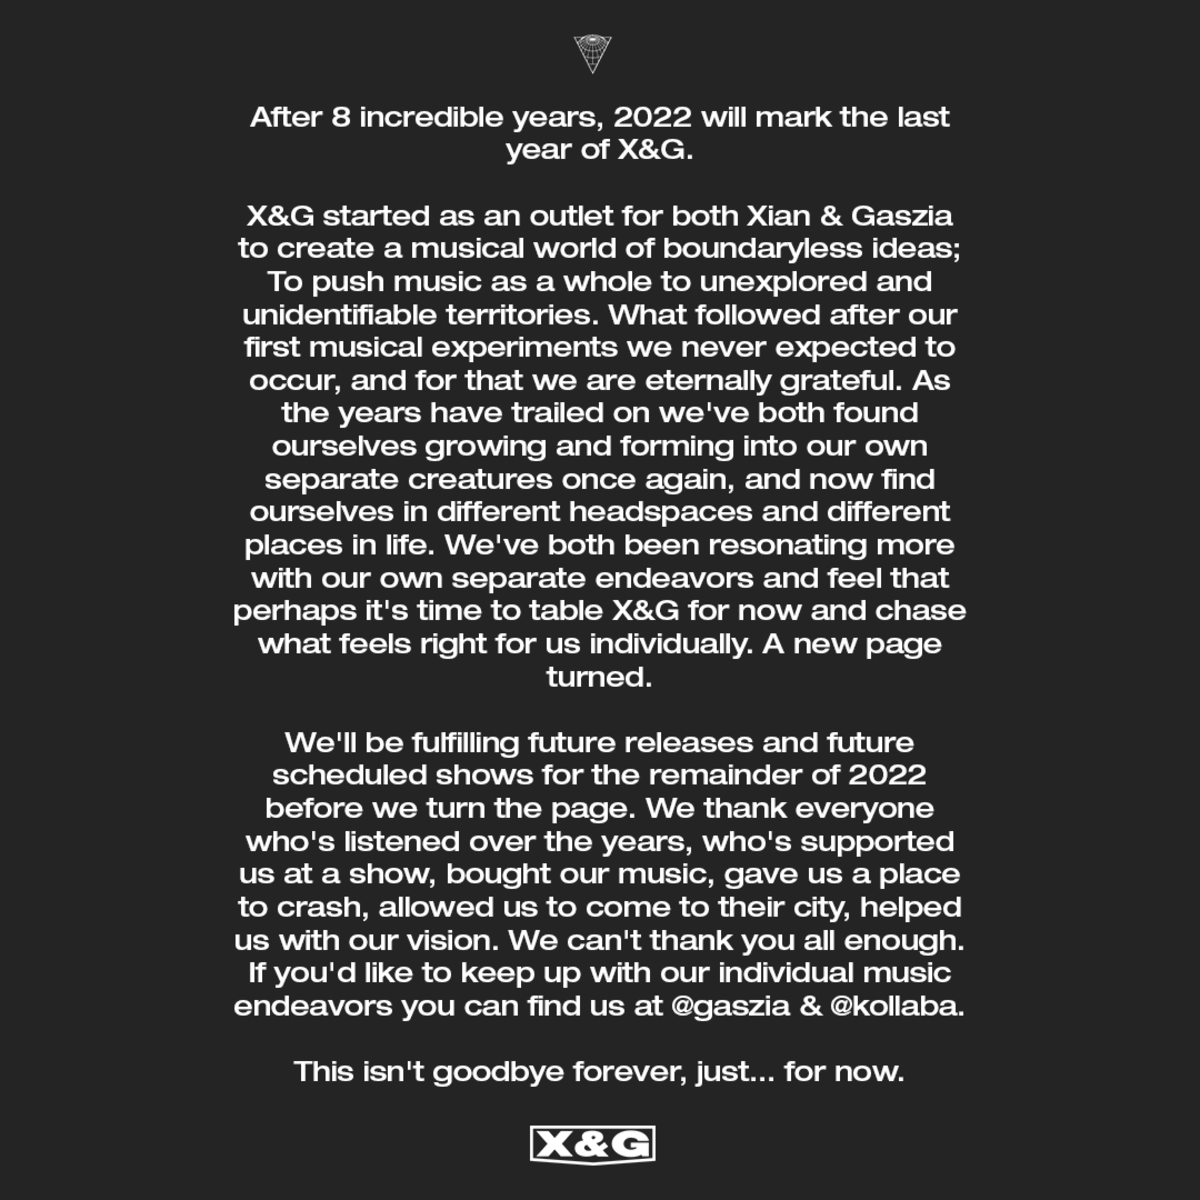 Statement shared by X&G announcing their split.